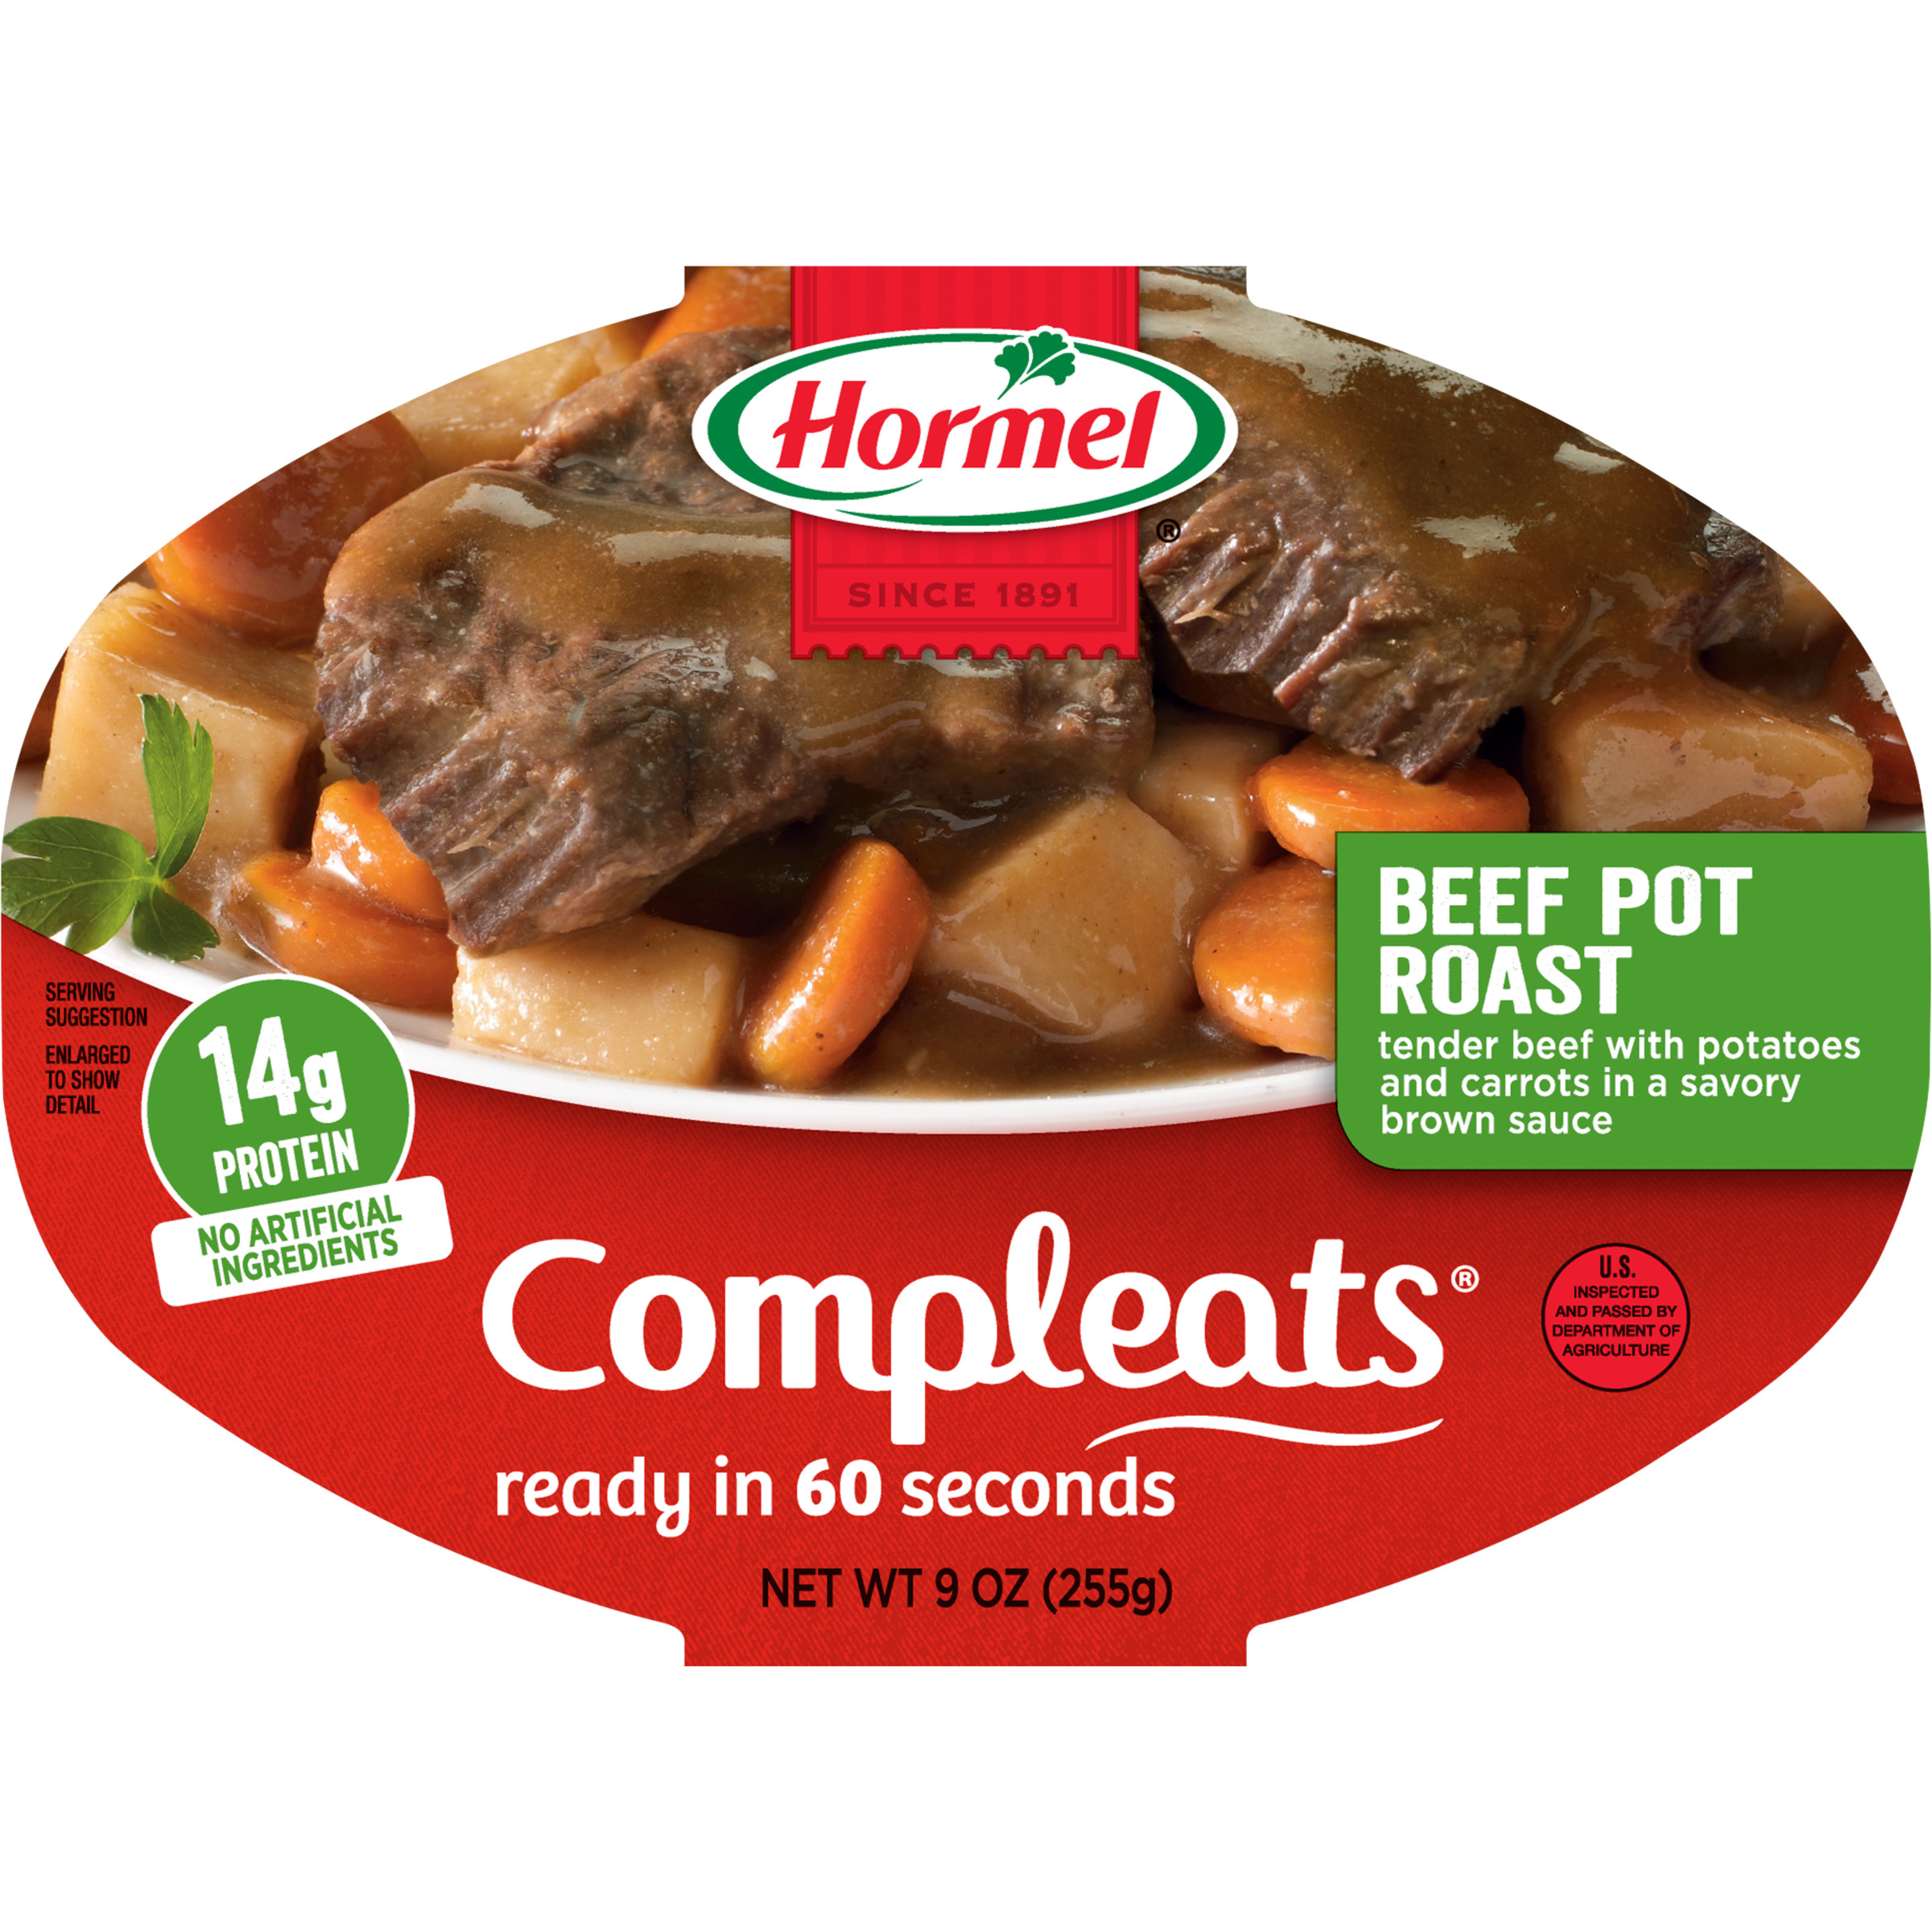 HORMEL COMPLEATS Beef Pot Roast, Shelf Stable 9 oz Plastic Tray - image 1 of 15